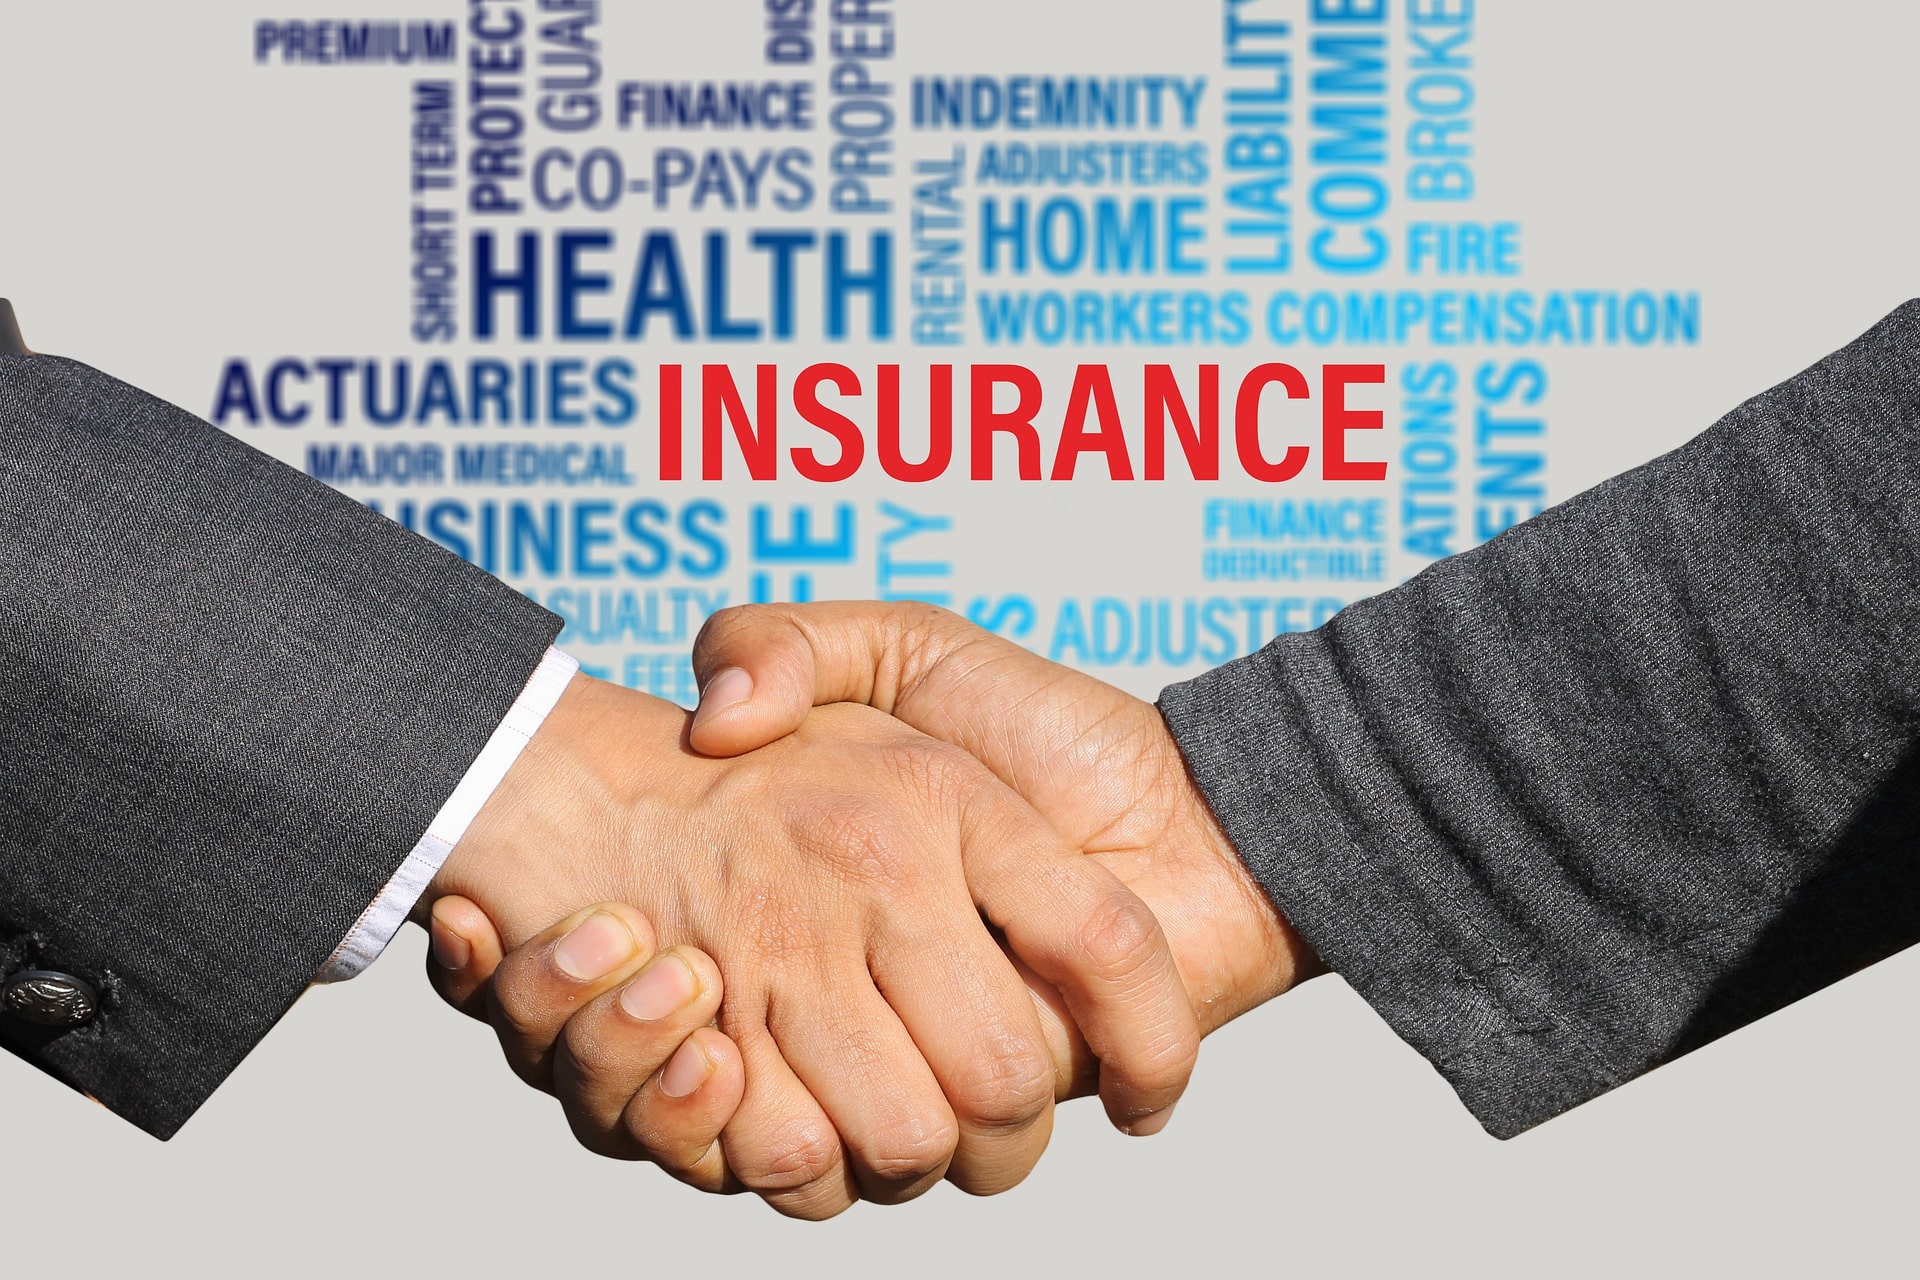 Image of Shaking Hands with Insurance Graphic in the Background